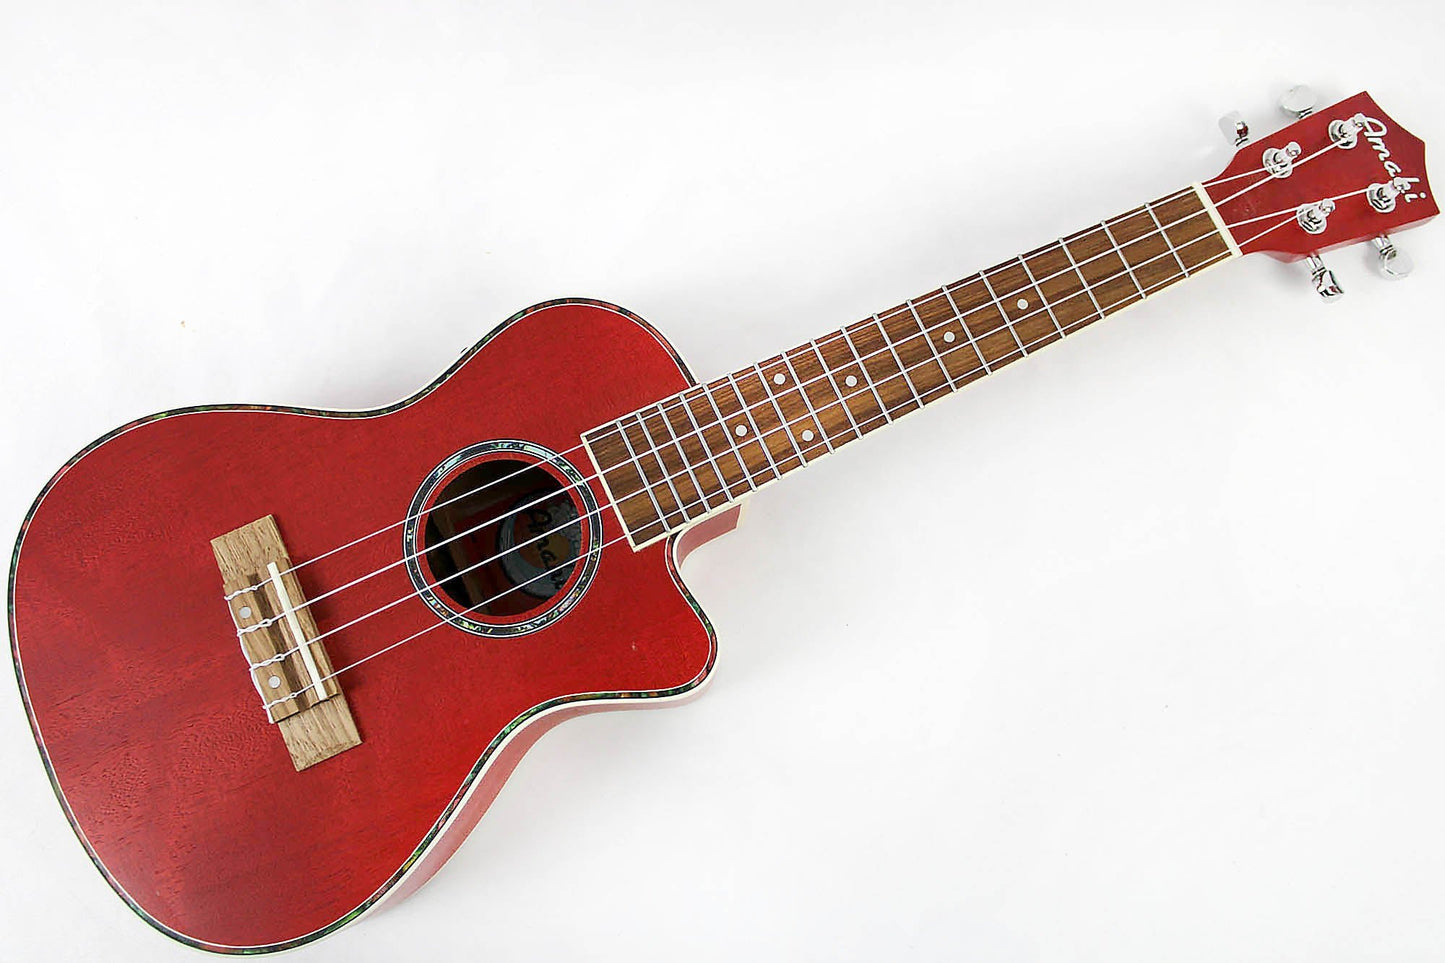 This is the front full view of the top and neck of an Amahi UK205EQRD Concert Ukulele with EQ-Red.